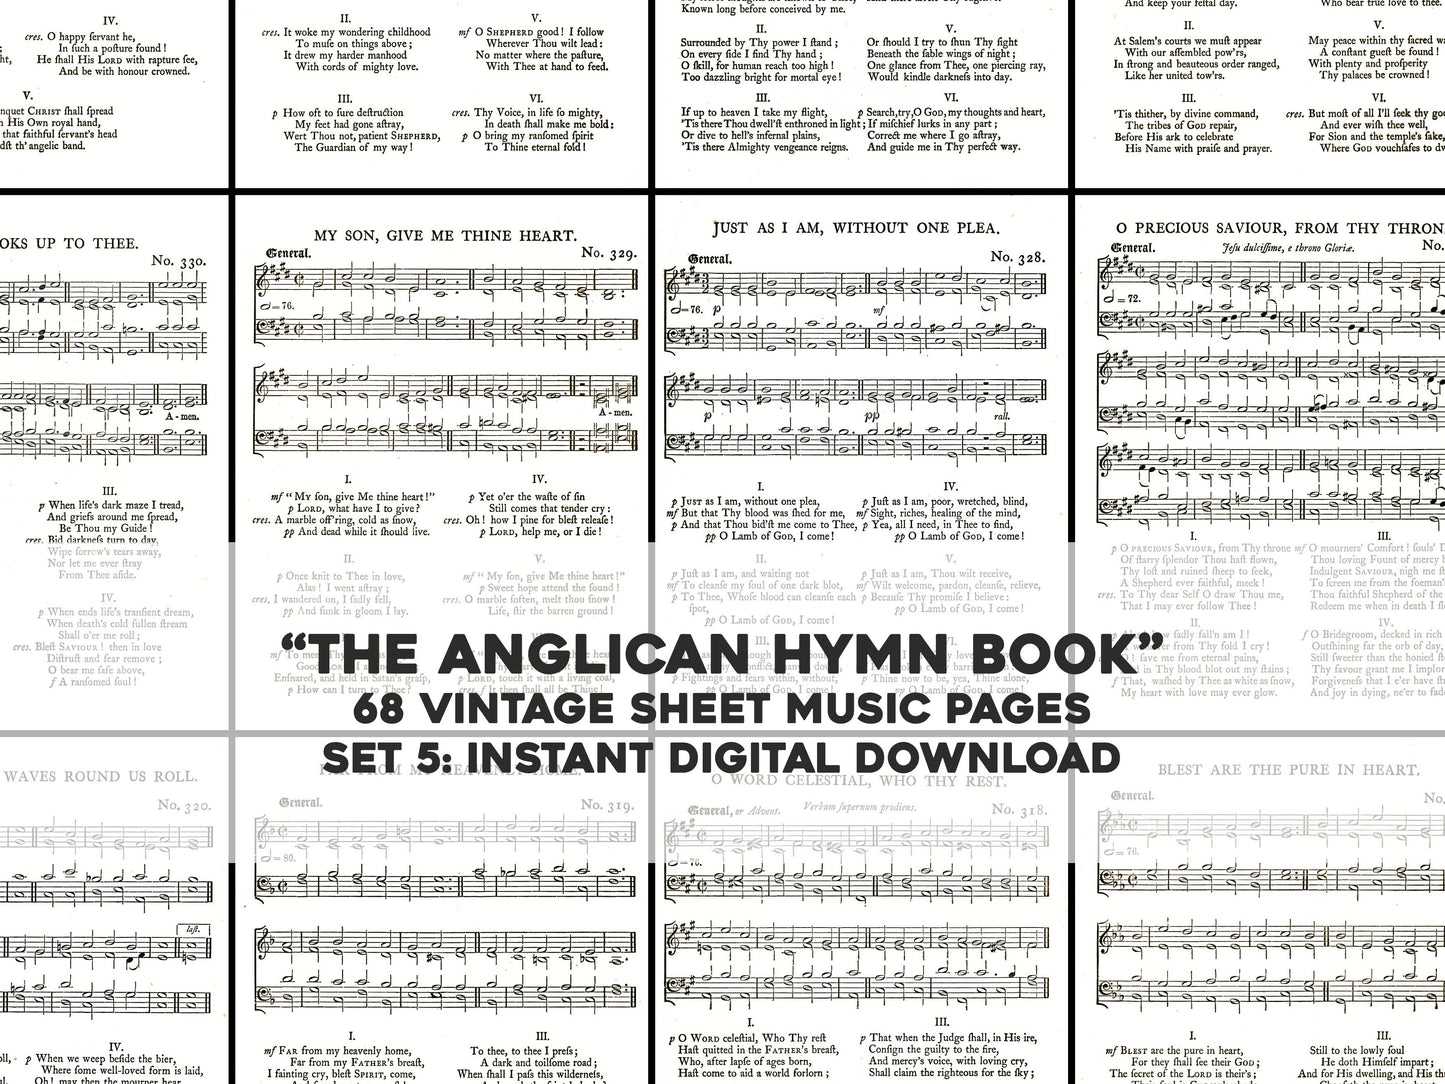 The Anglican Hymn Book Set 5 [68 Images]